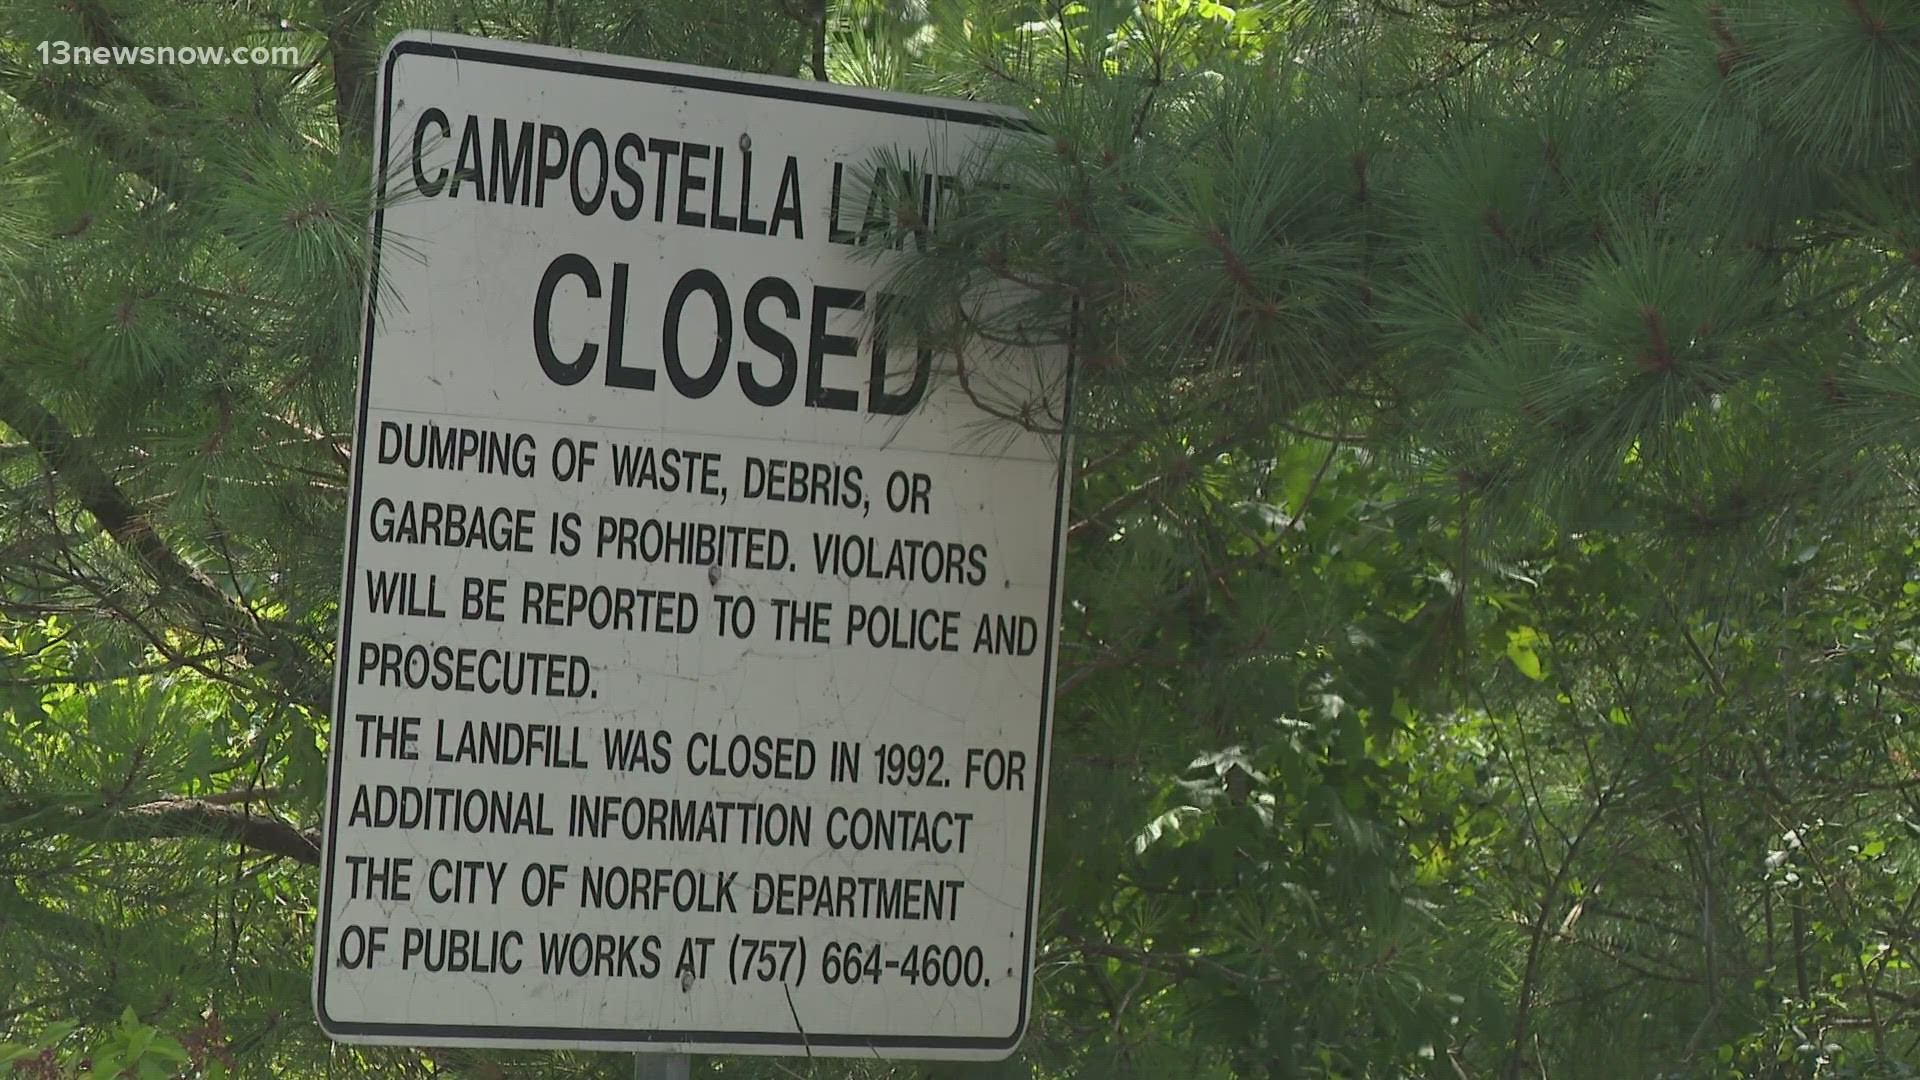 Norfolk City Council members voted in favor of redeveloping the empty Campostella landfill.